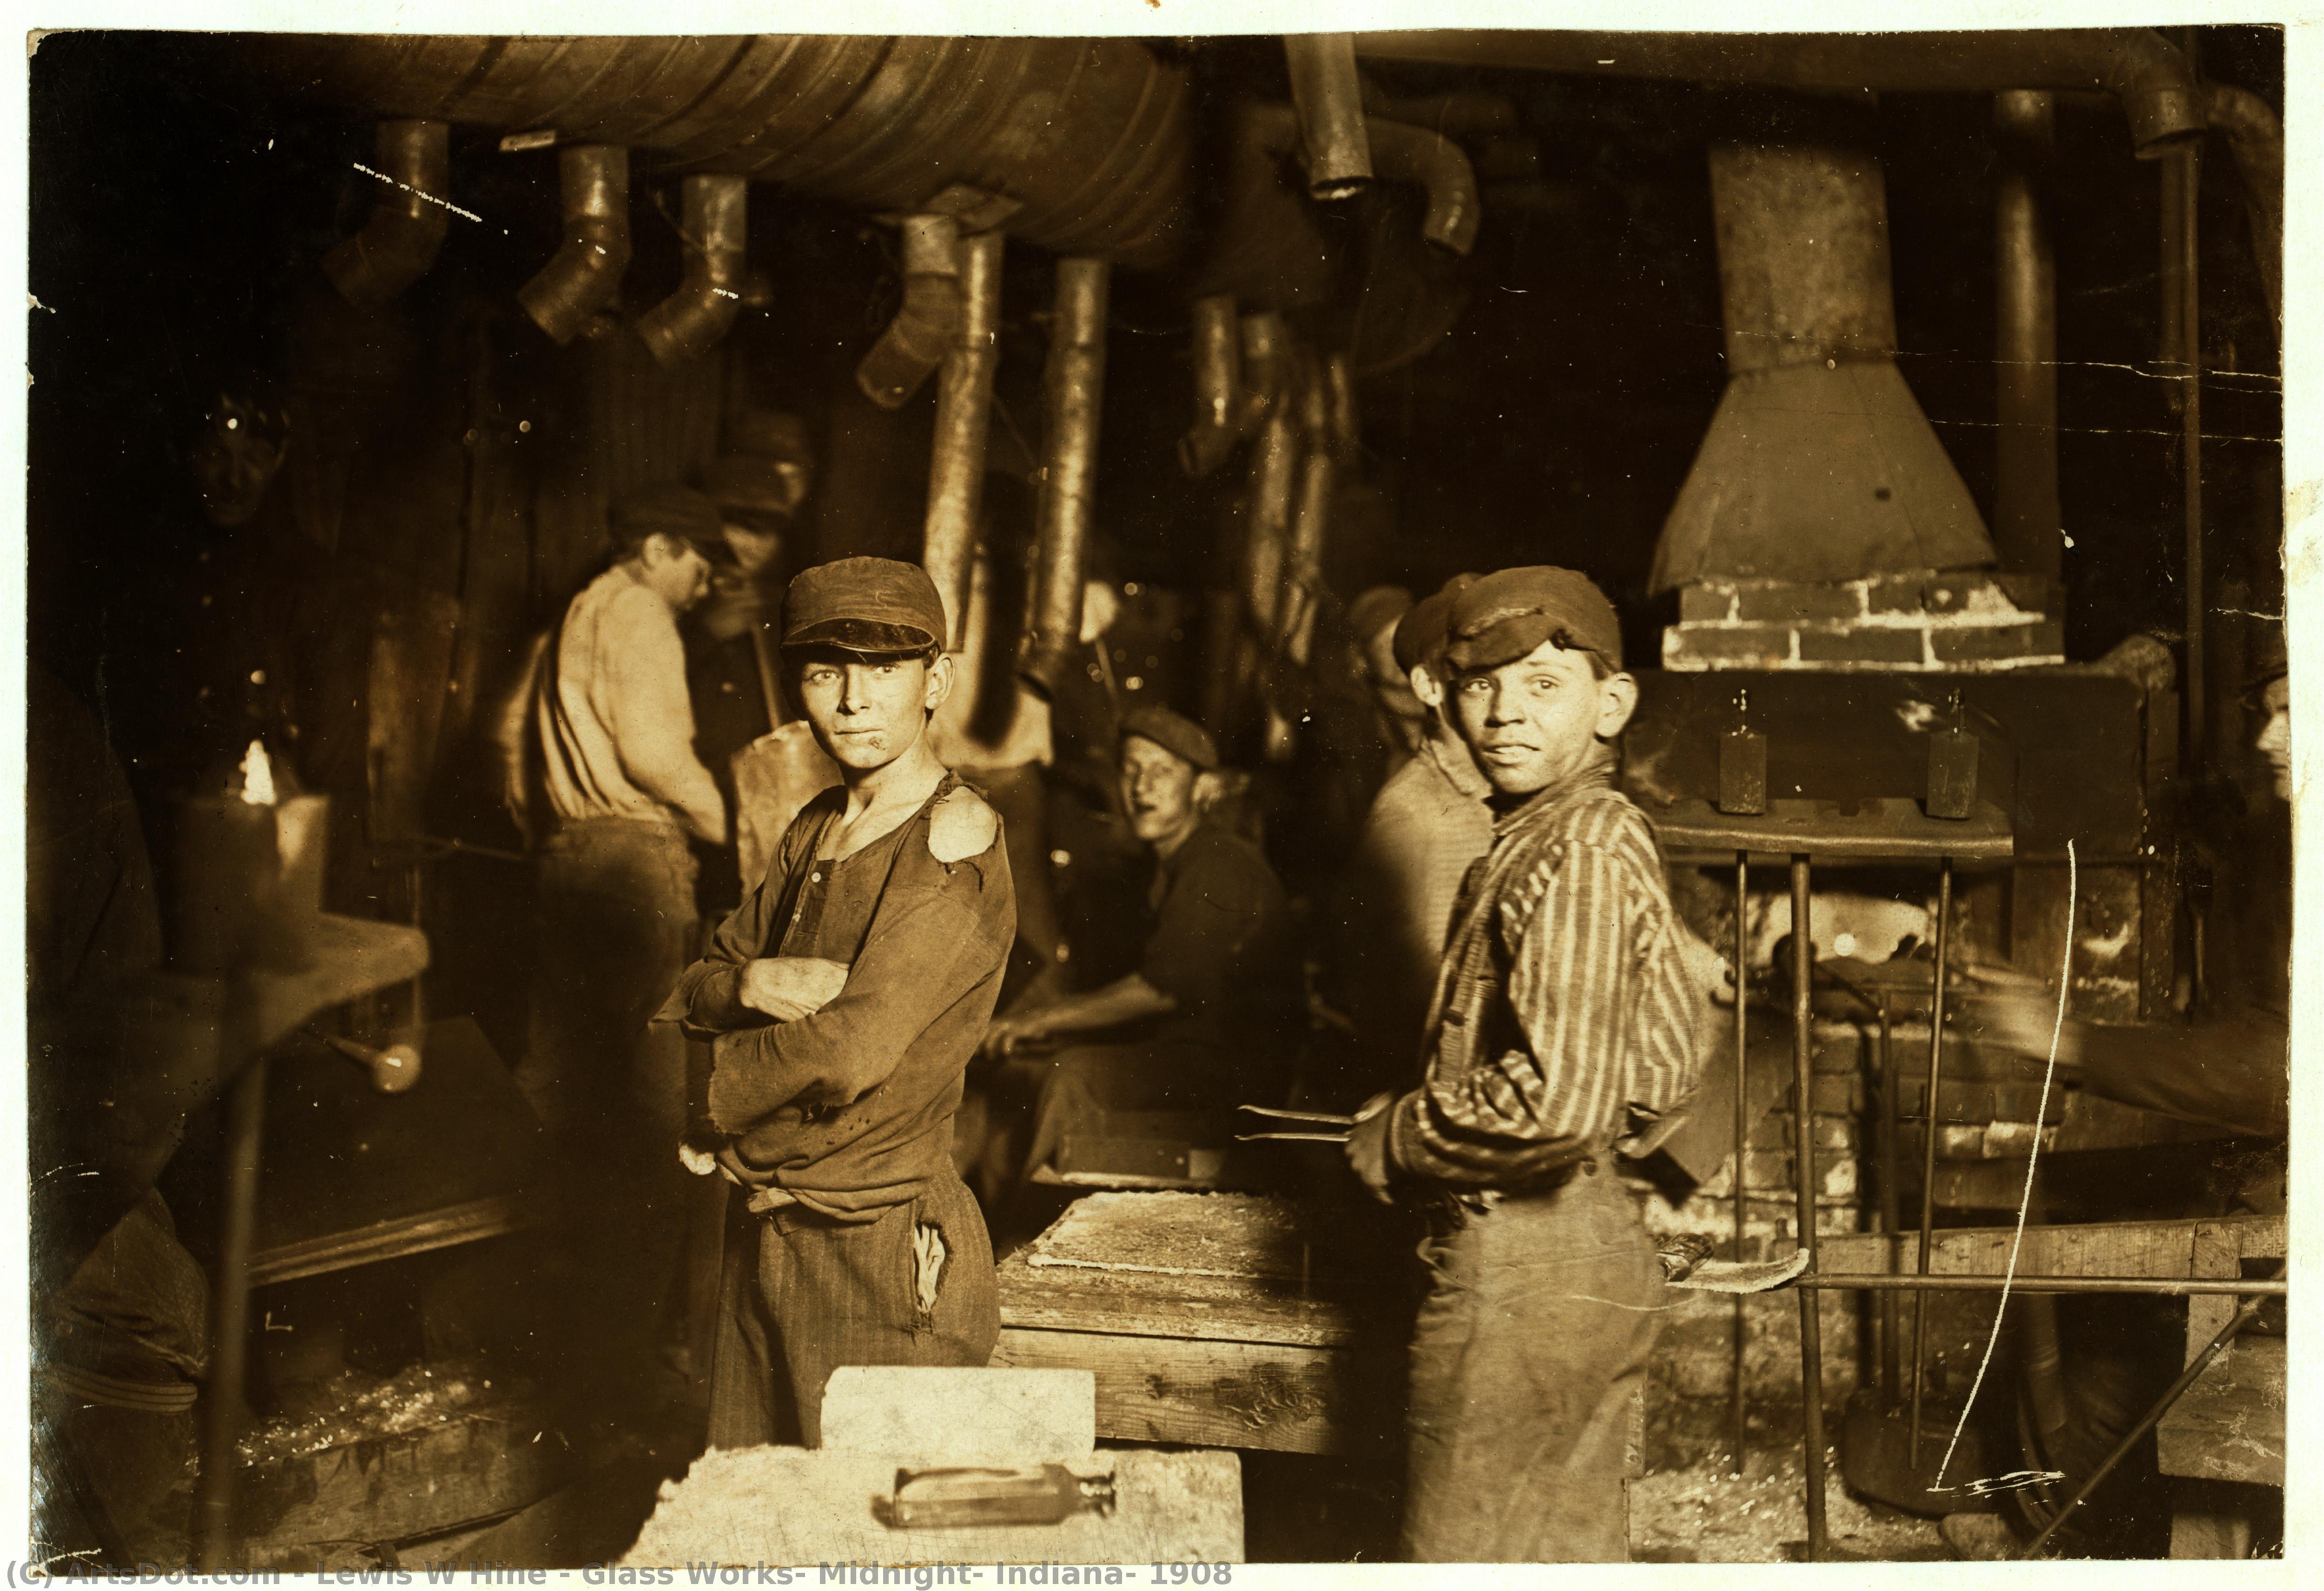  Art Reproductions Glass Works, Midnight, Indiana, 1908, 1908 by Lewis W Hine (1874-1940, United States) | ArtsDot.com